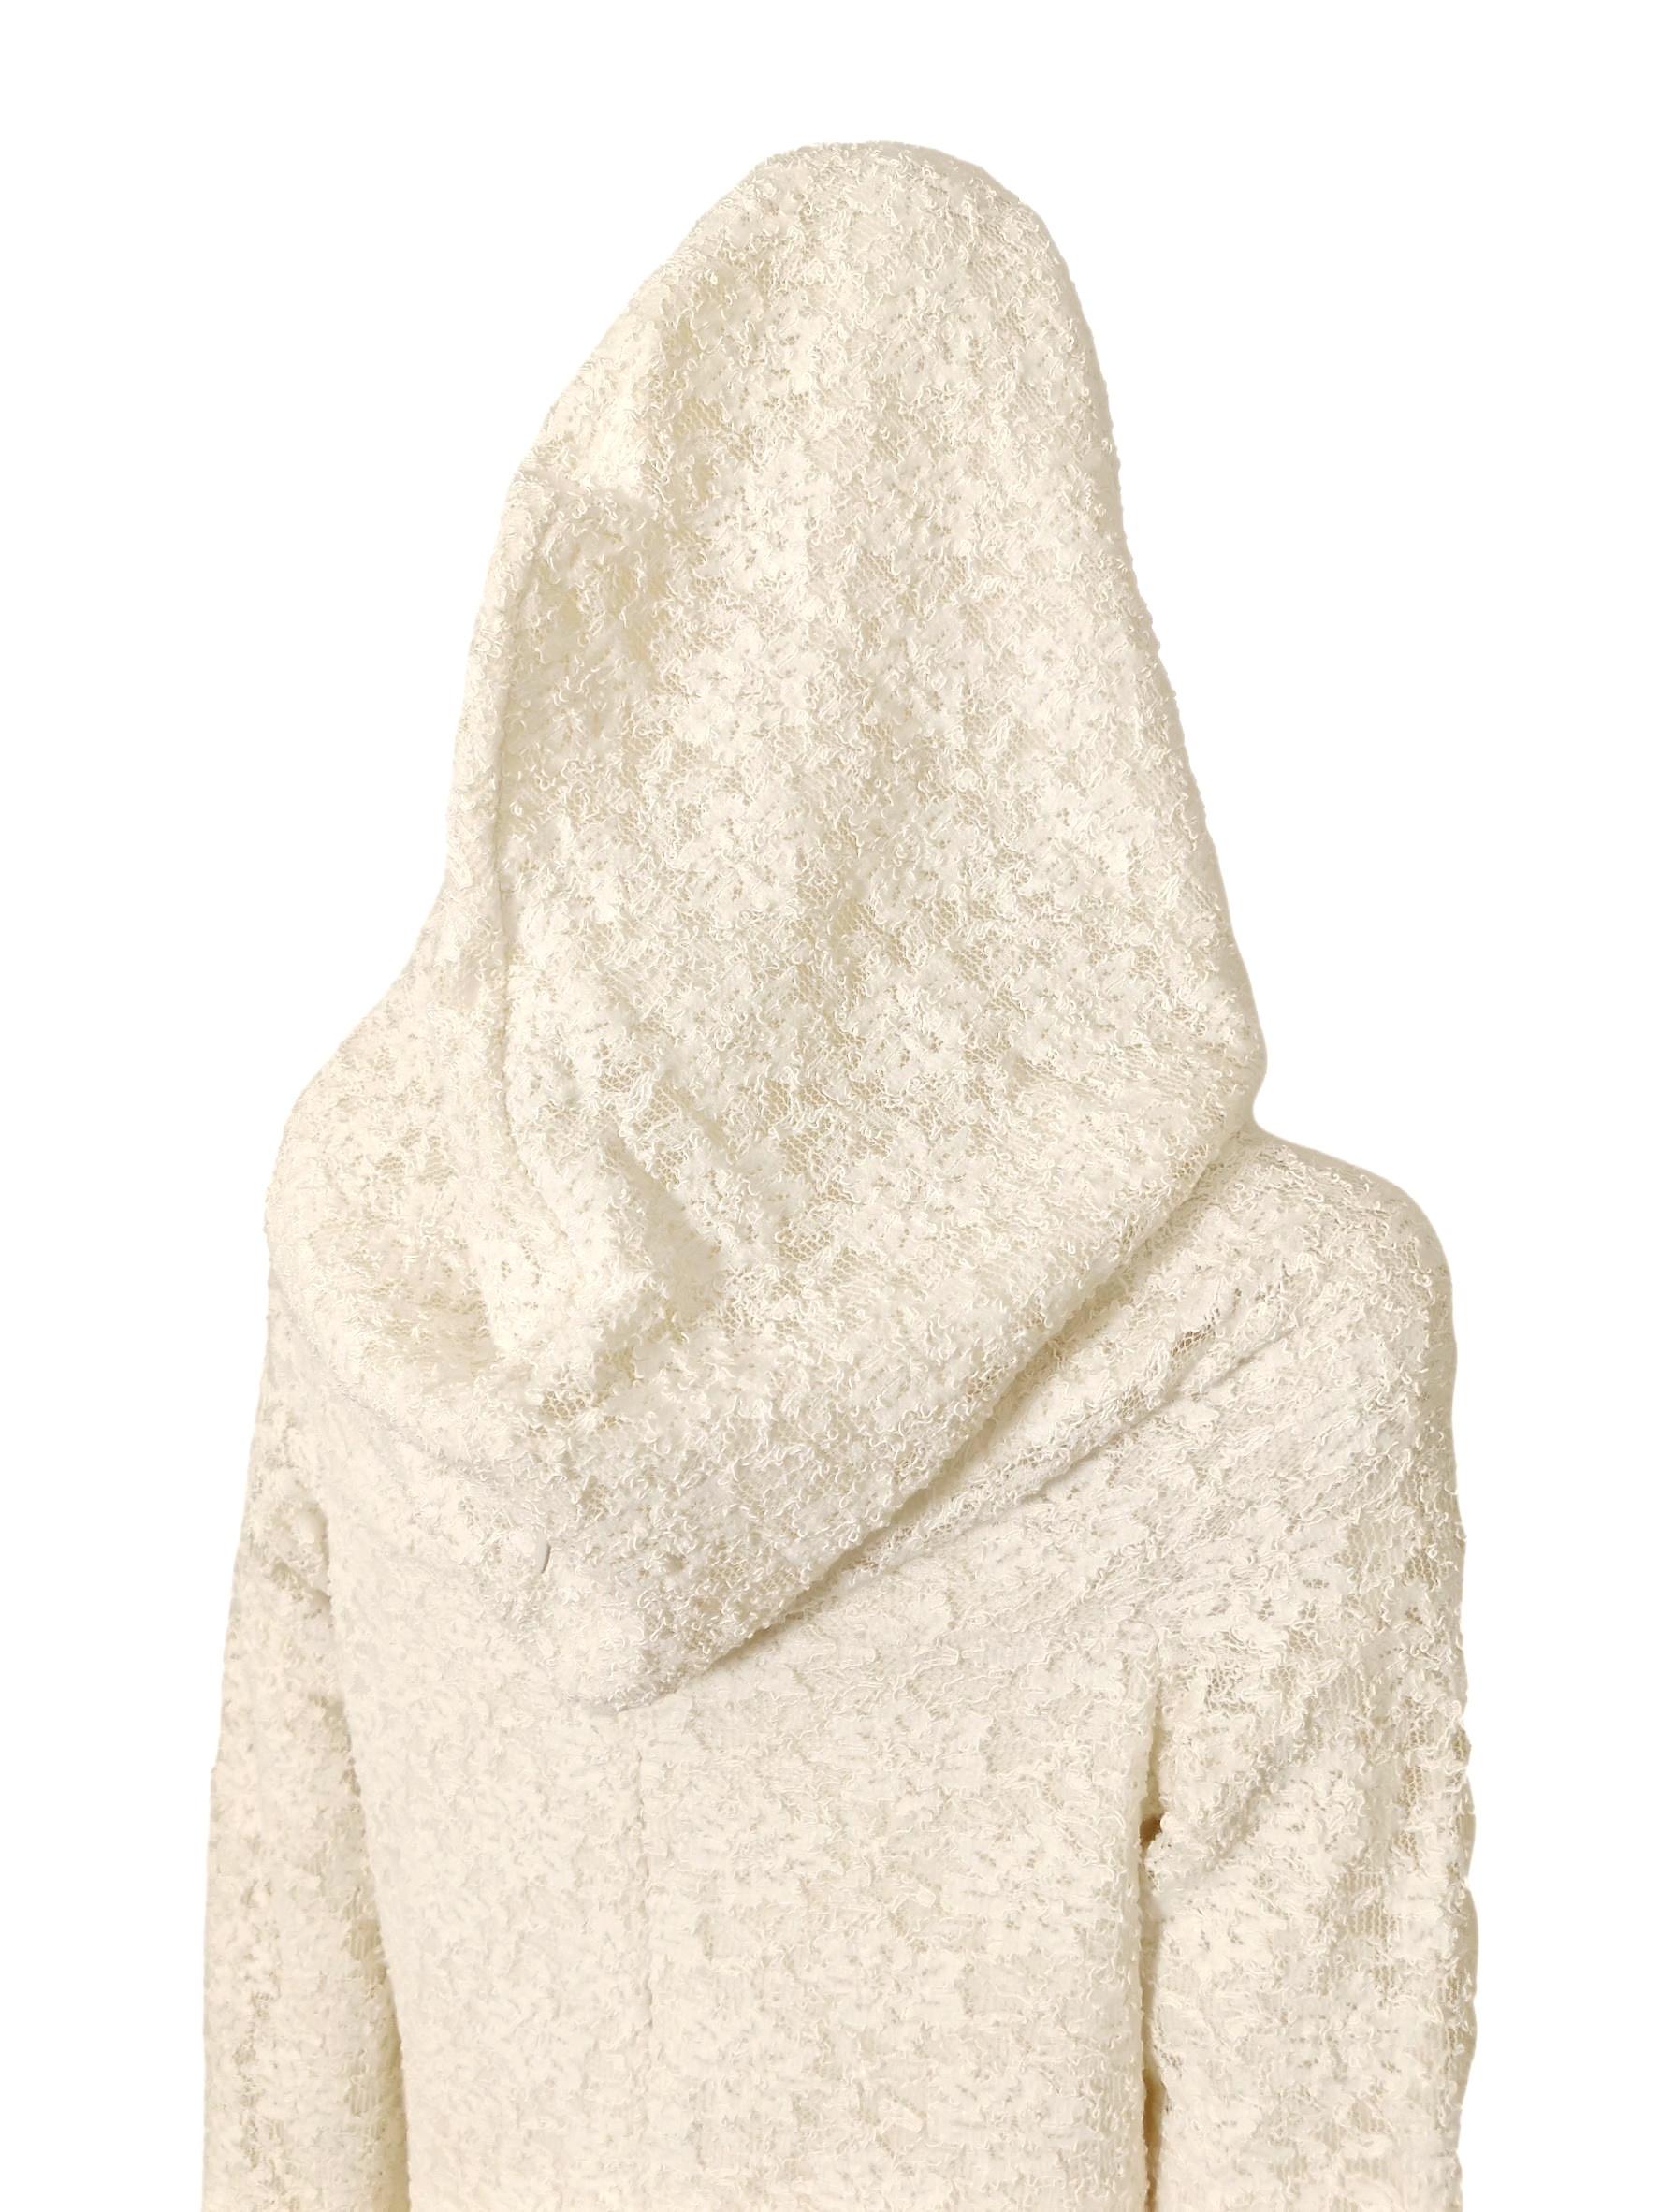 Comme Des Garcons White Drama Cowl Hooded Dress AD 2011 For Sale 6